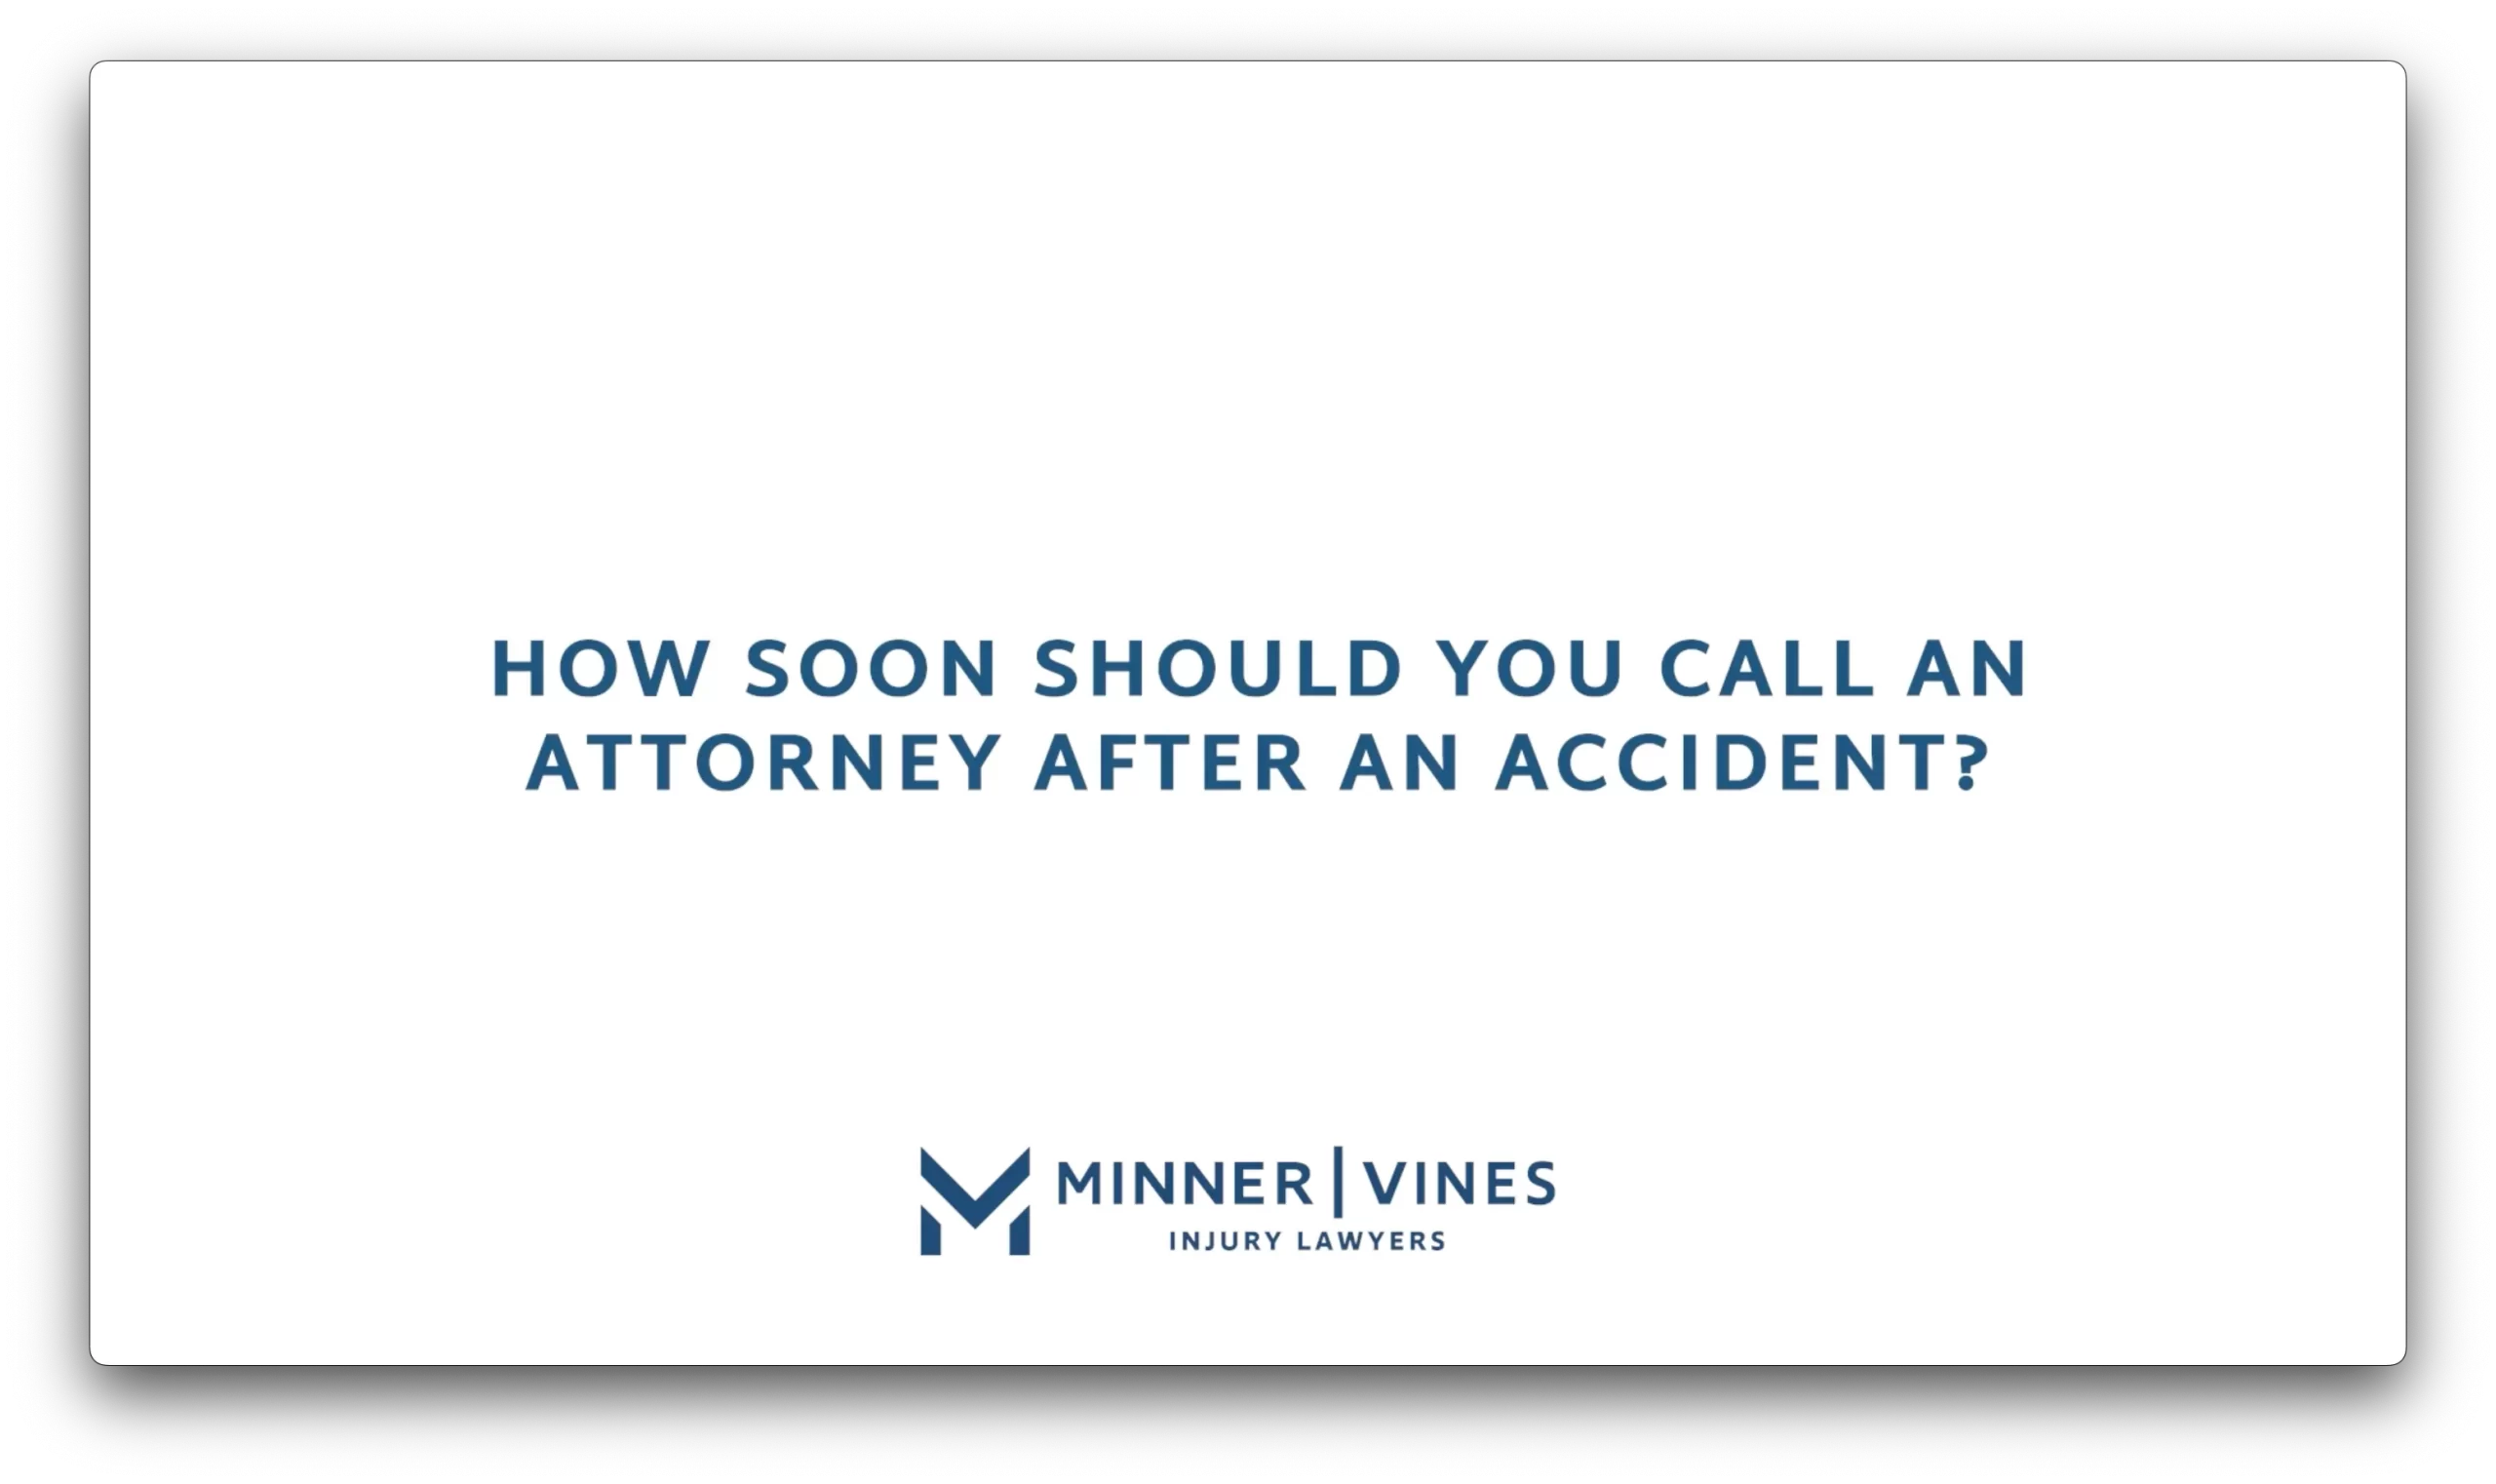 How soon should you call an attorney after an accident?